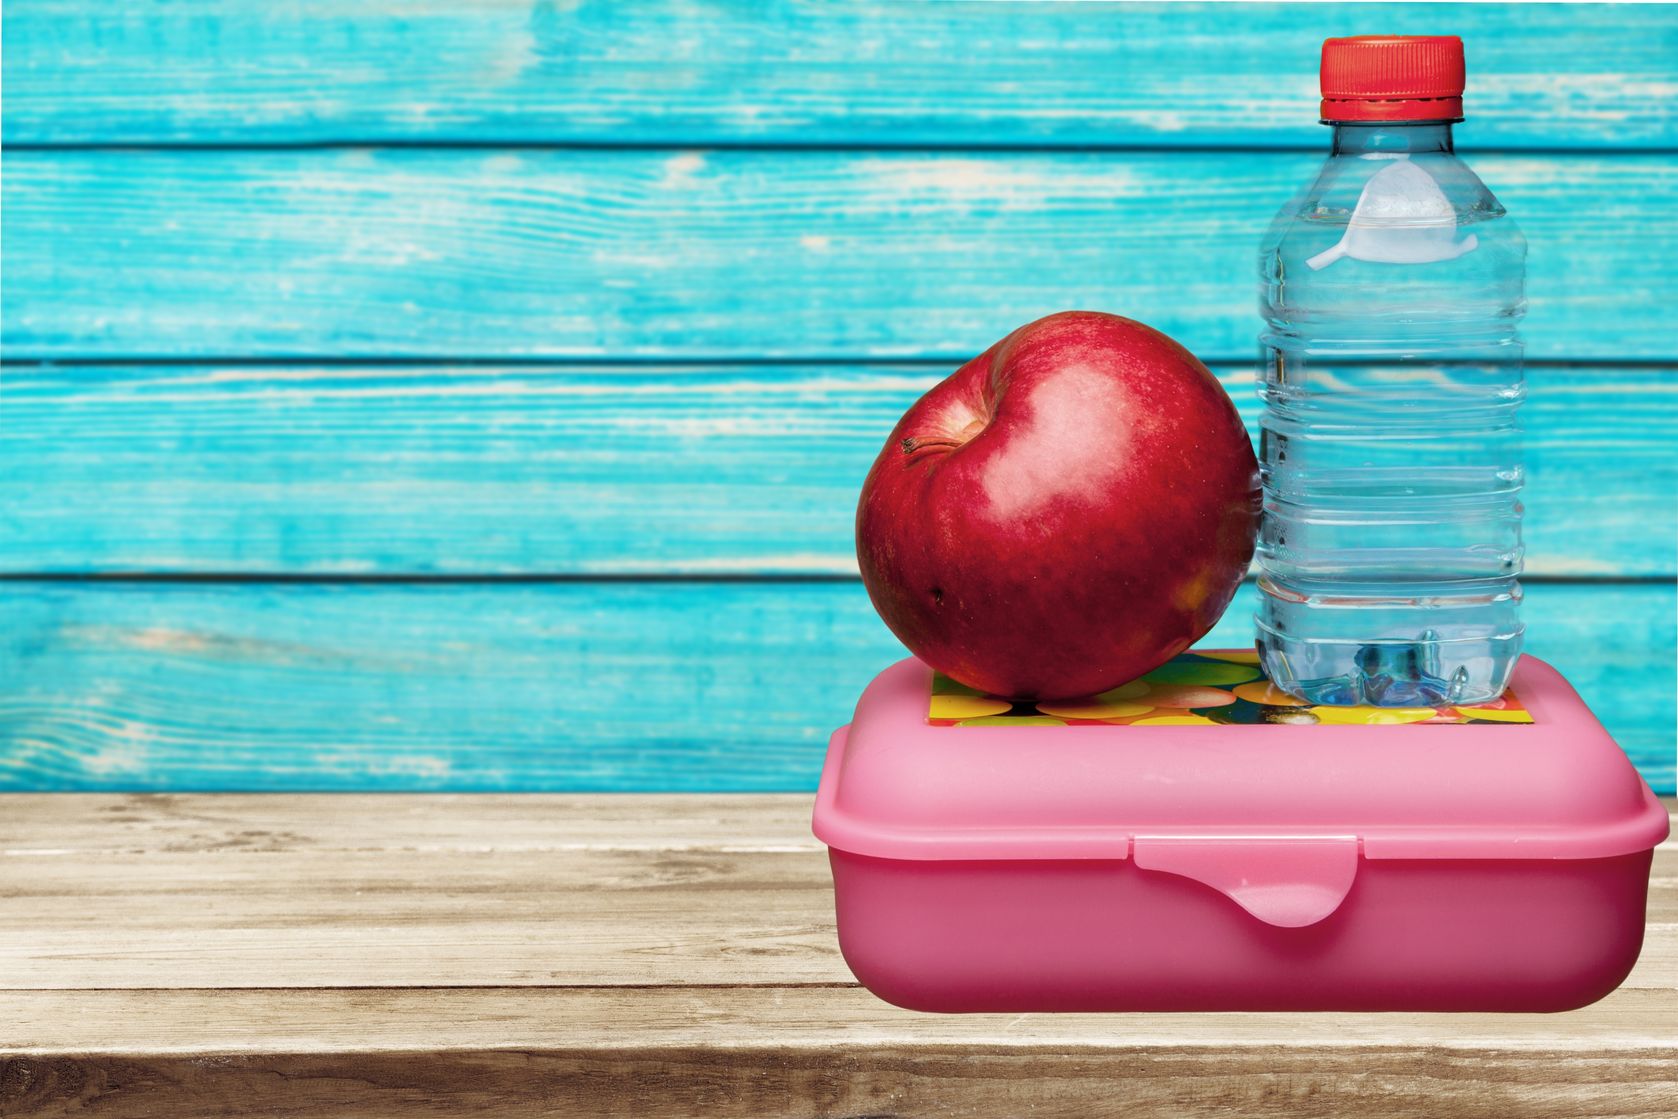 Don't splurge on school lunches, there are many options for budget friendly school lunches